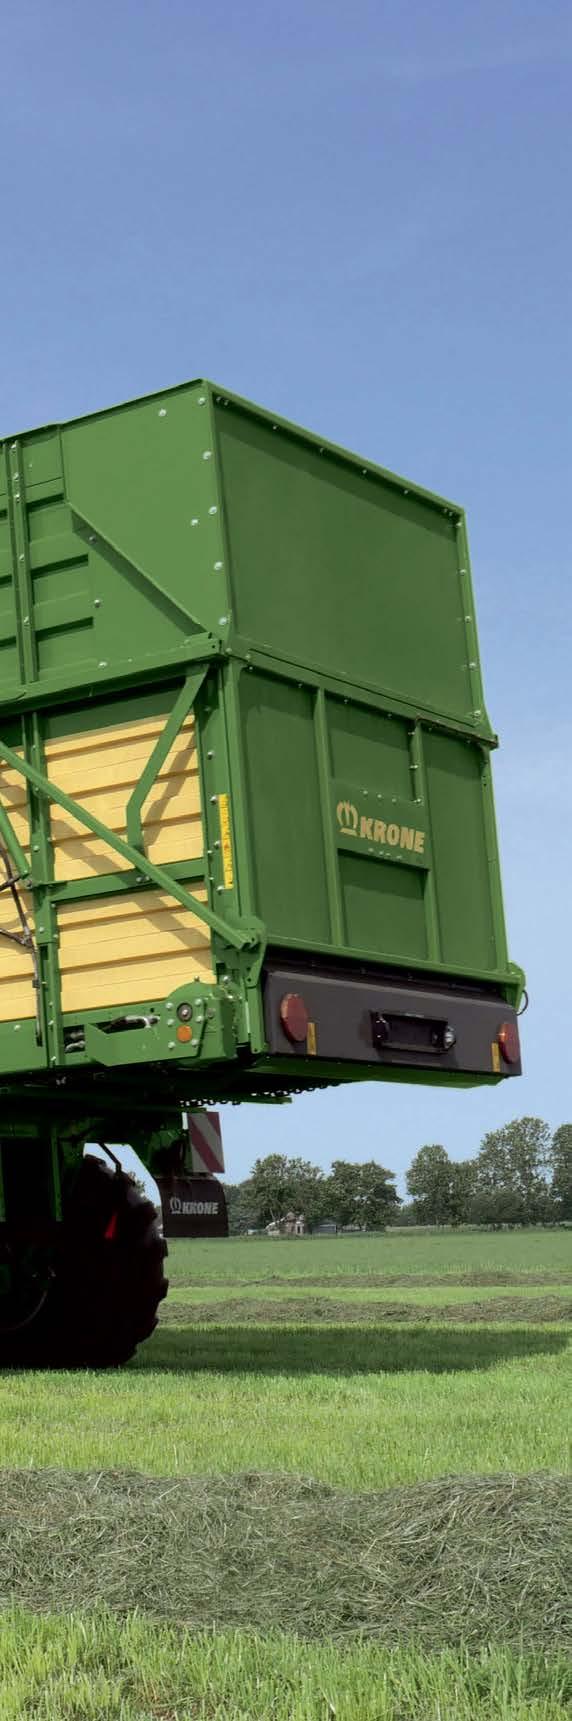 AX Self-loading and forager-filled forage wagons Fully-featured multi-purpose forage wagon Collapsible, steel or silage extensions Massive pick-up and feed rotor 32-blade cutting system AX defines